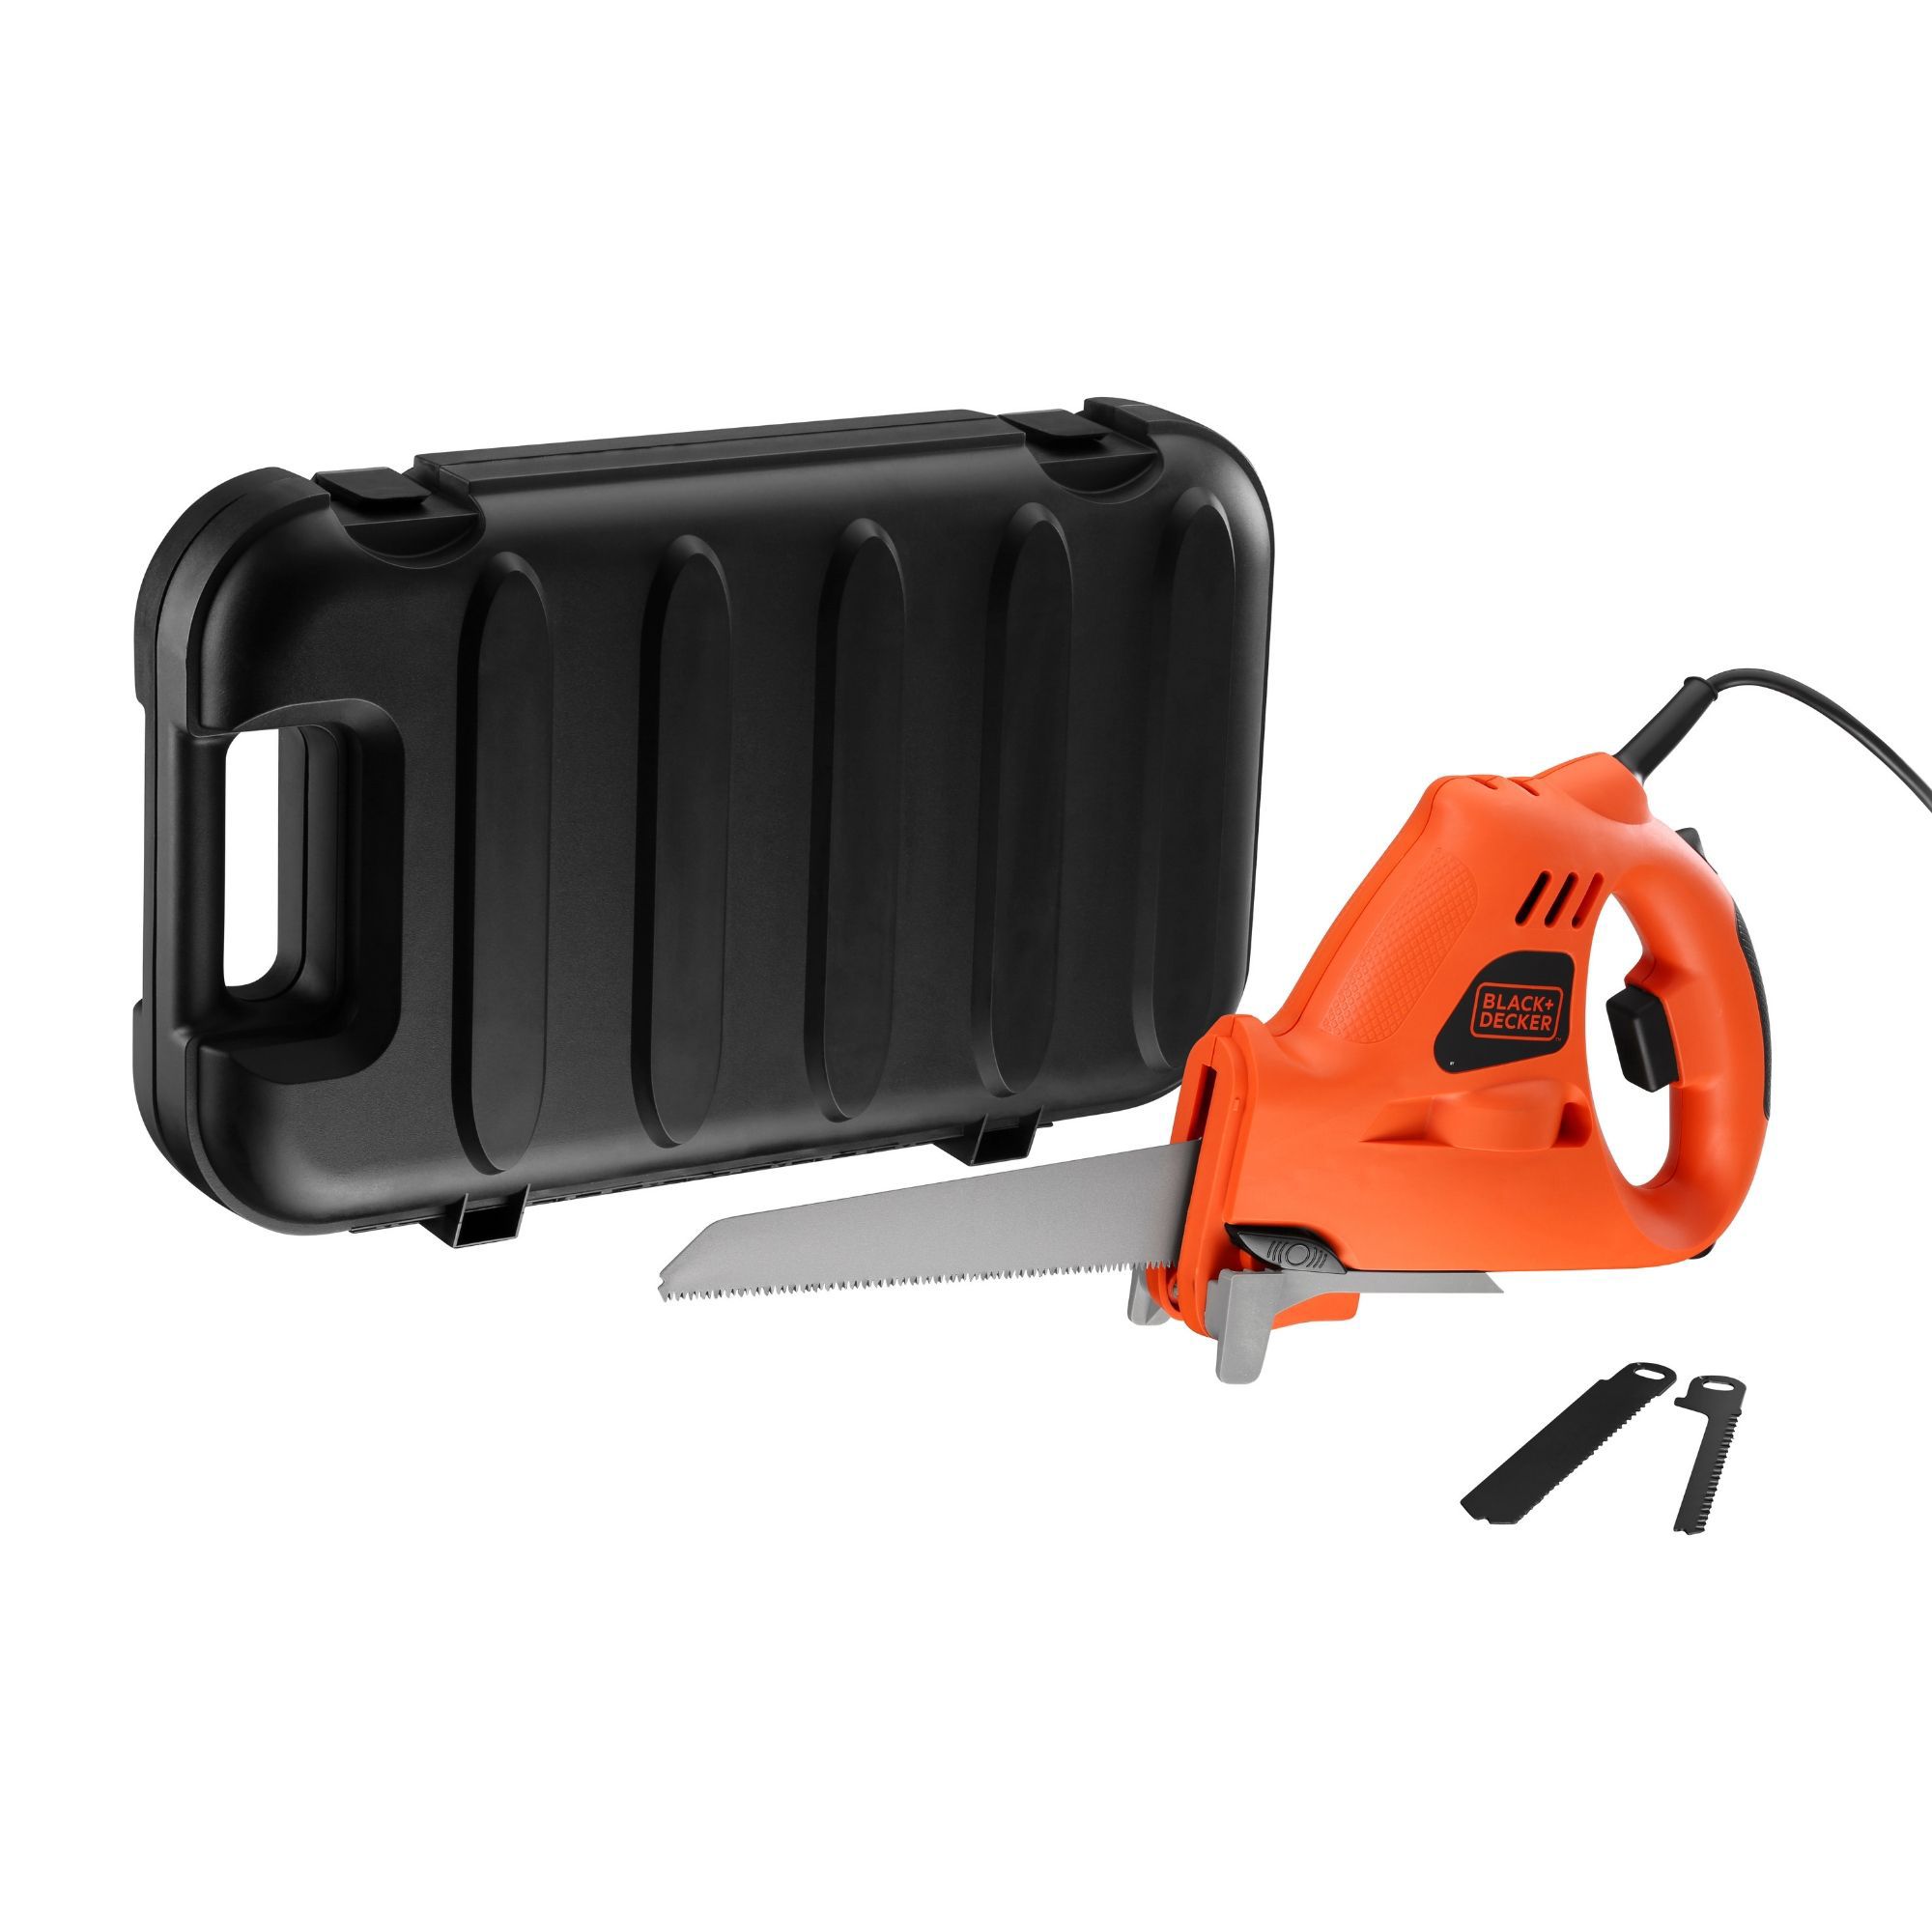 Black & Decker RS500K Corded Reciprocating Saw, Keyless Blade clamp, 120 V,  8.5 A, 1-1/8 in Stroke